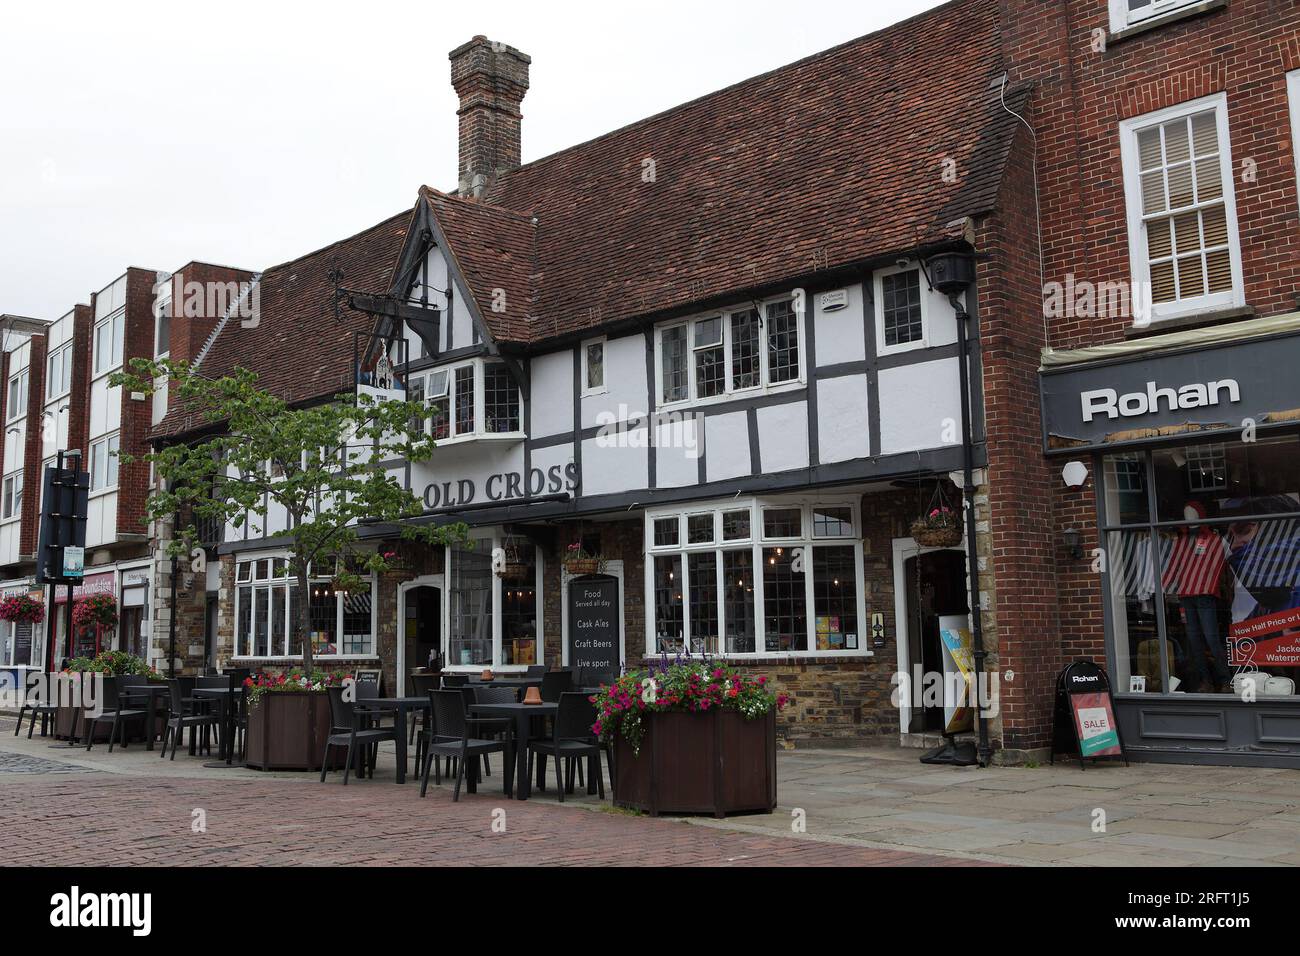 The Old Cross Public House in North Street, Chichester, West Sussex, England. Stock Photo